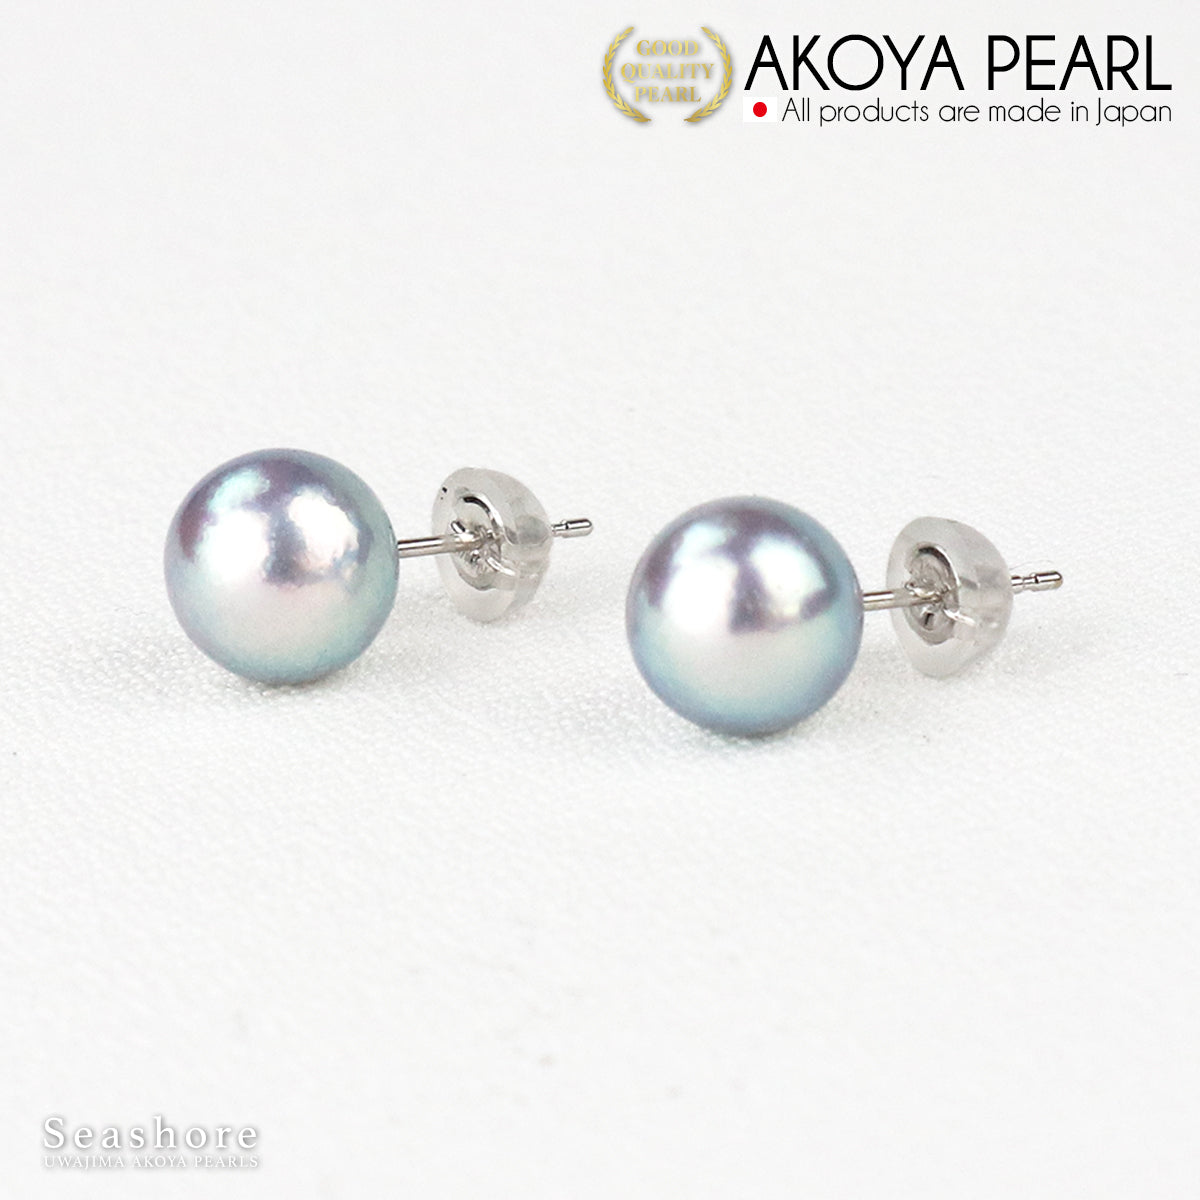 Pearl Hook Earrings Women's Baroque Natural Blue [8.0-8.5mm] Free Gift Included SV925 Akoya Akoya Pearl Accessories Simple Seashore Seashore
 Comes with a gray case for storage [Free shipping]